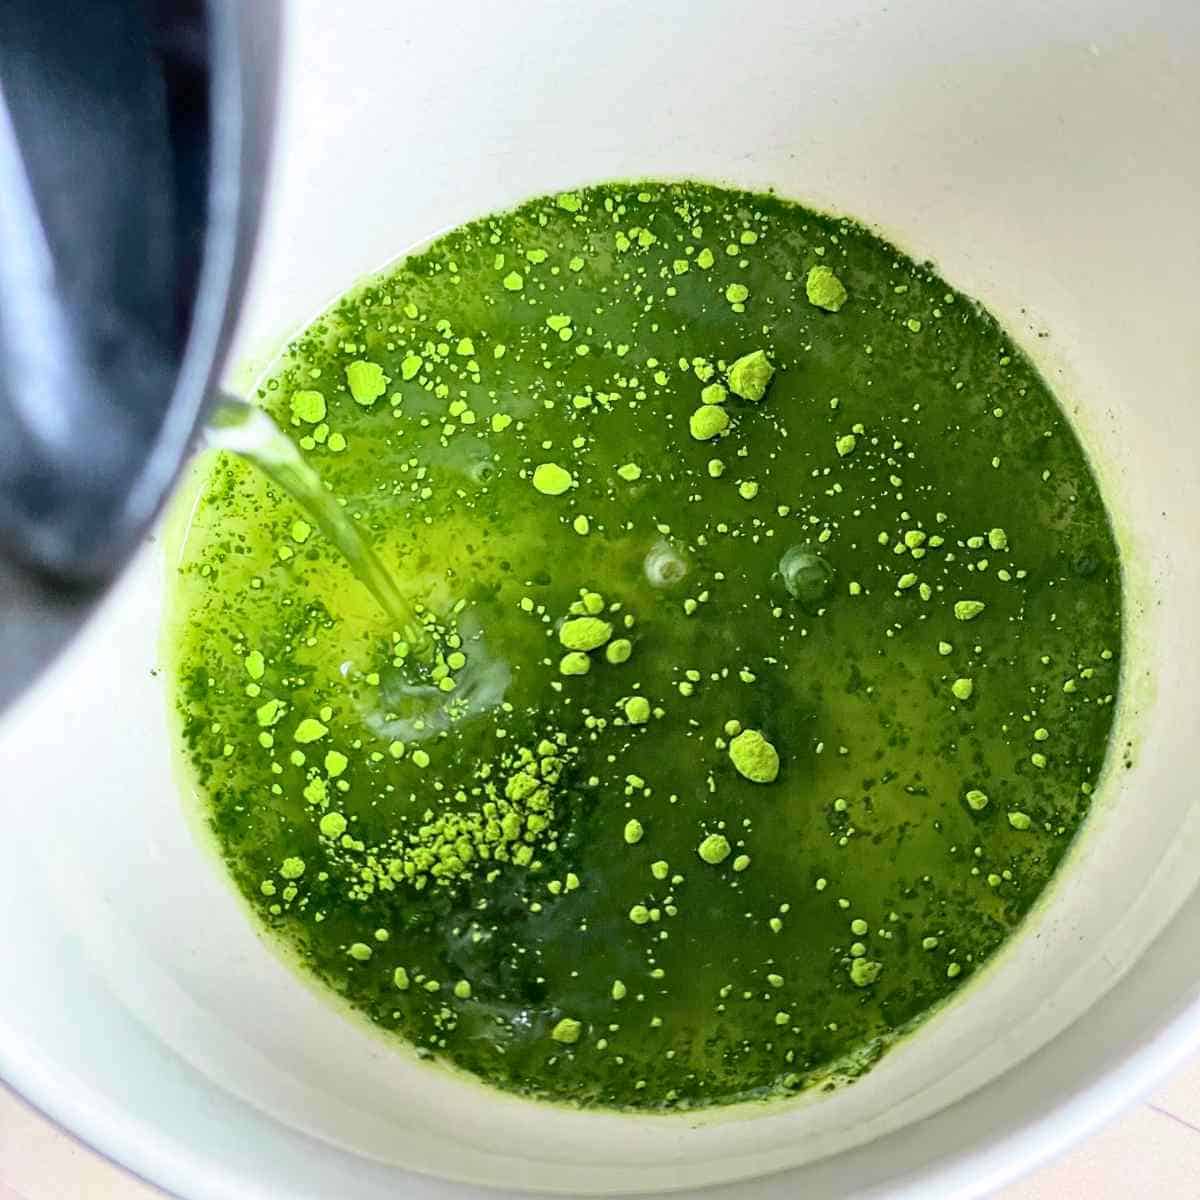 pour hot water into matcha powder